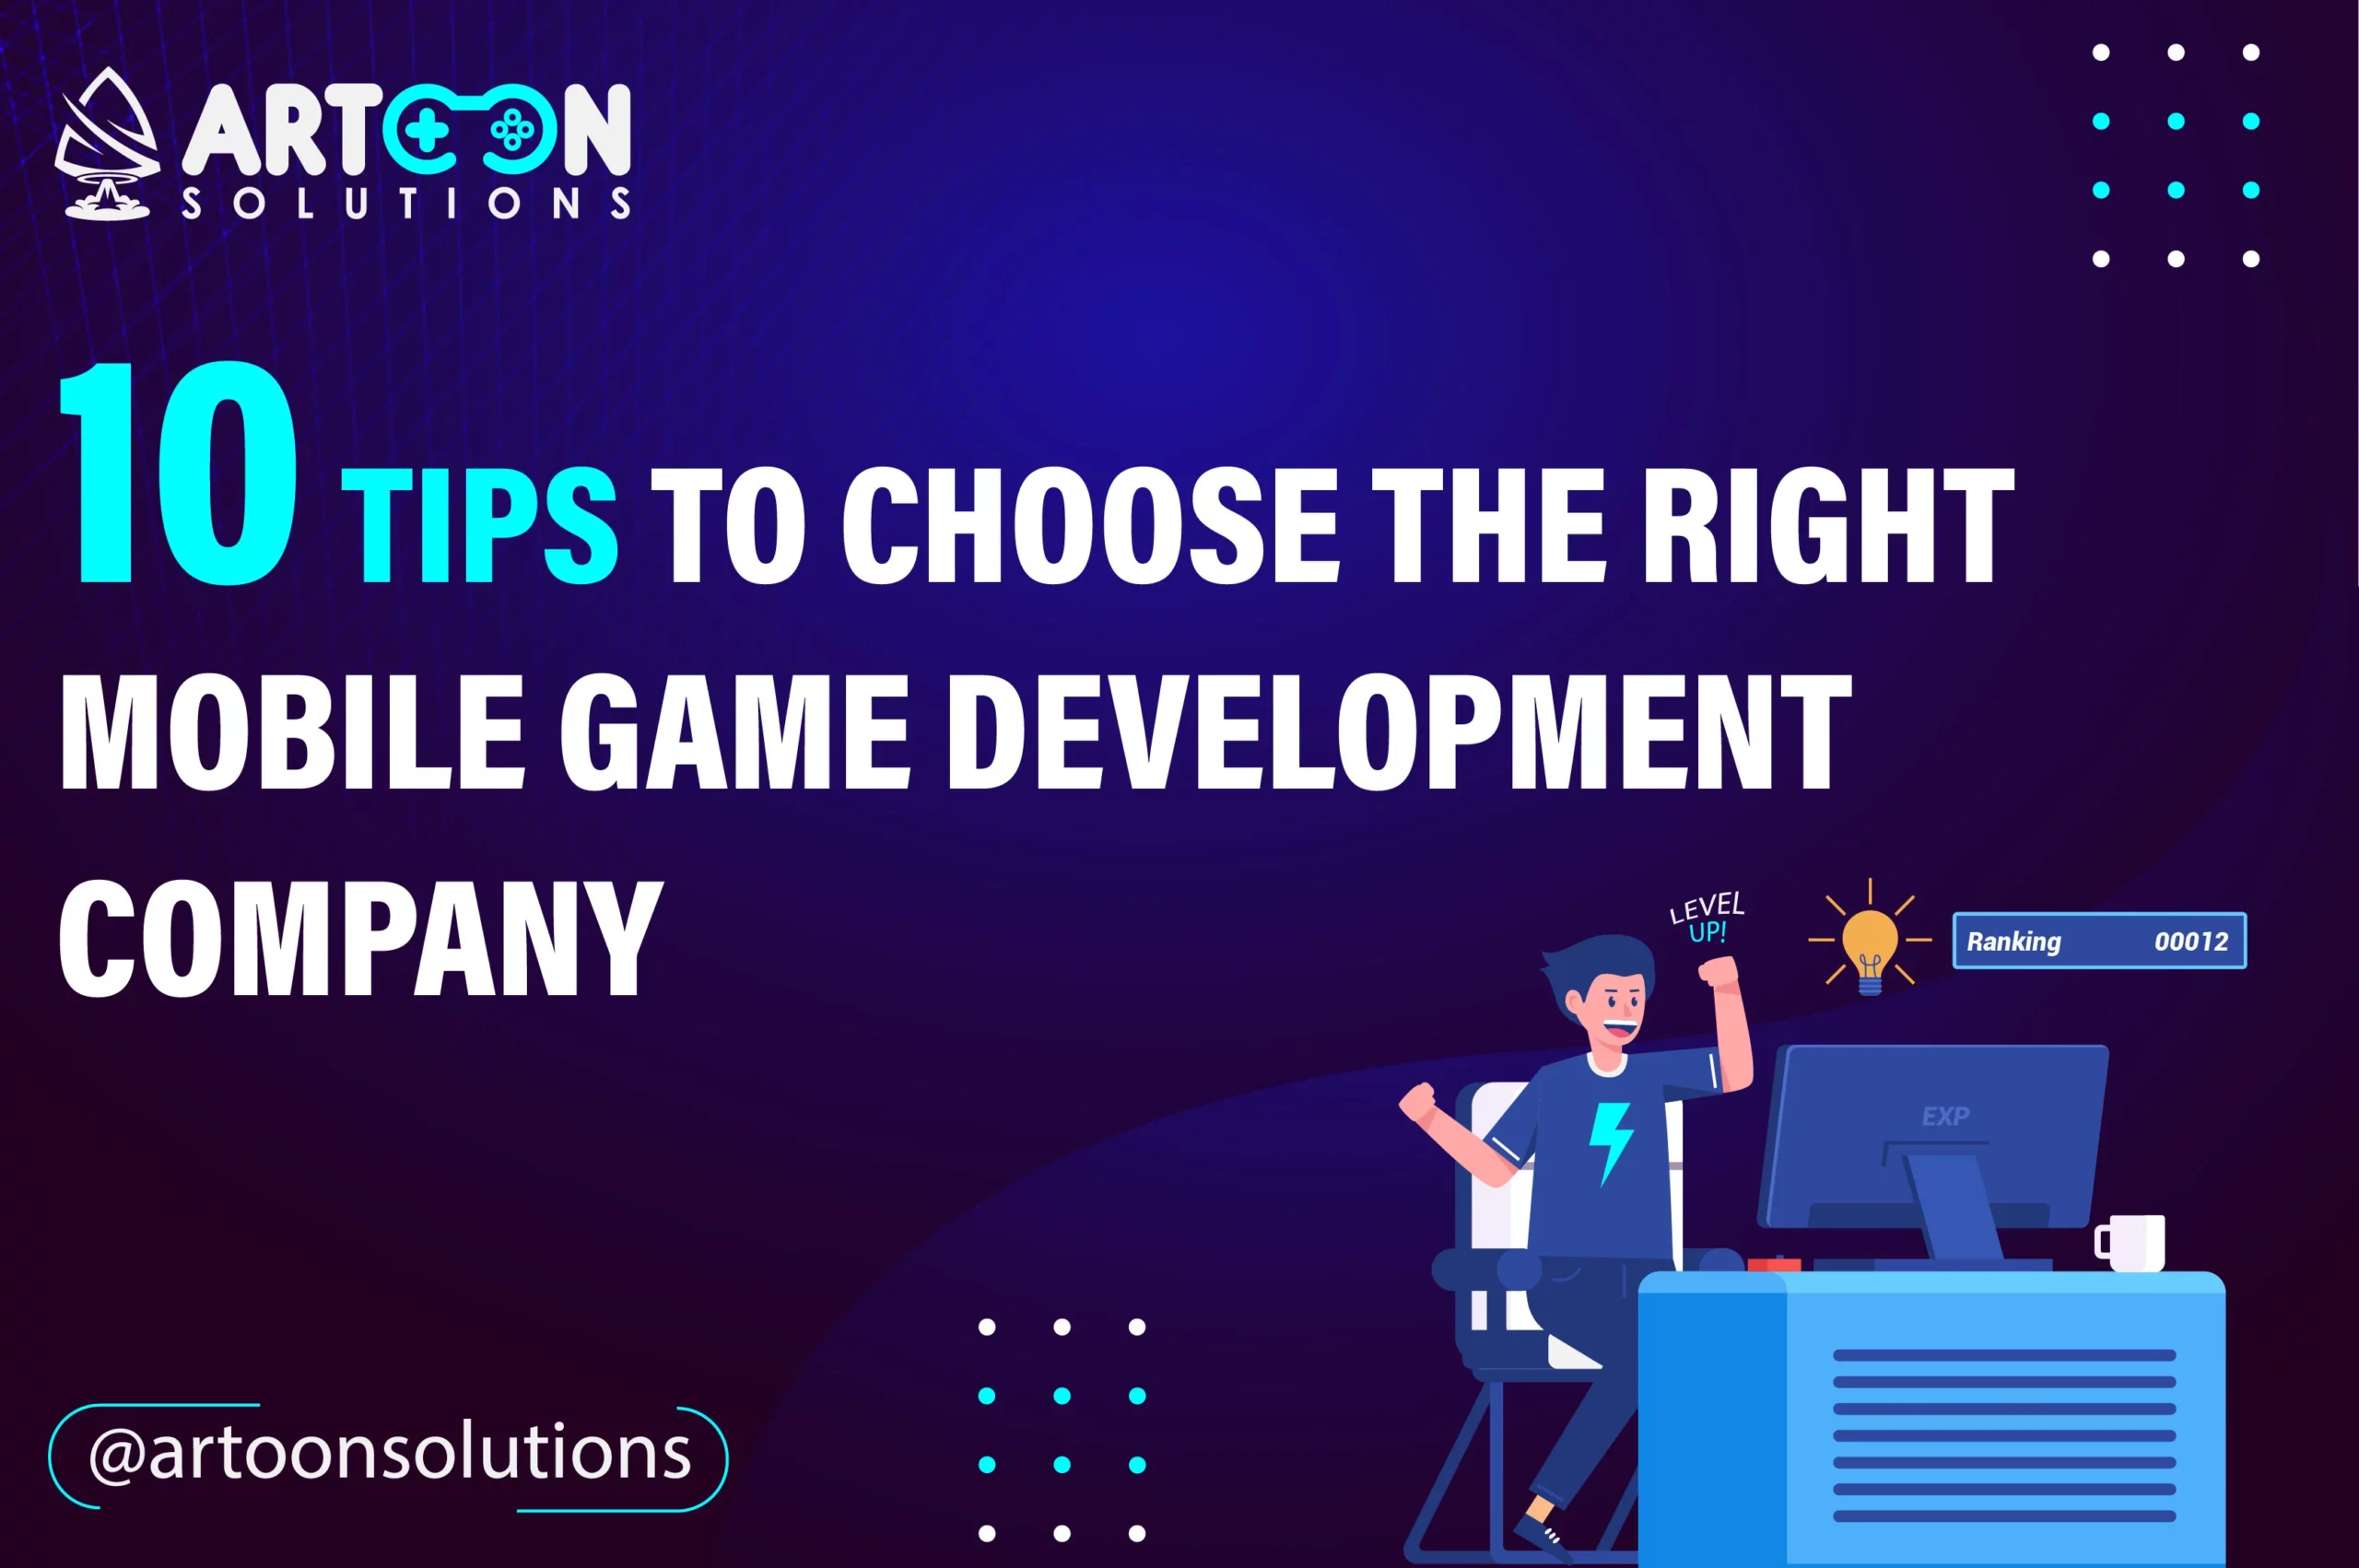 Tips to Choose the Right Mobile Game Development Company